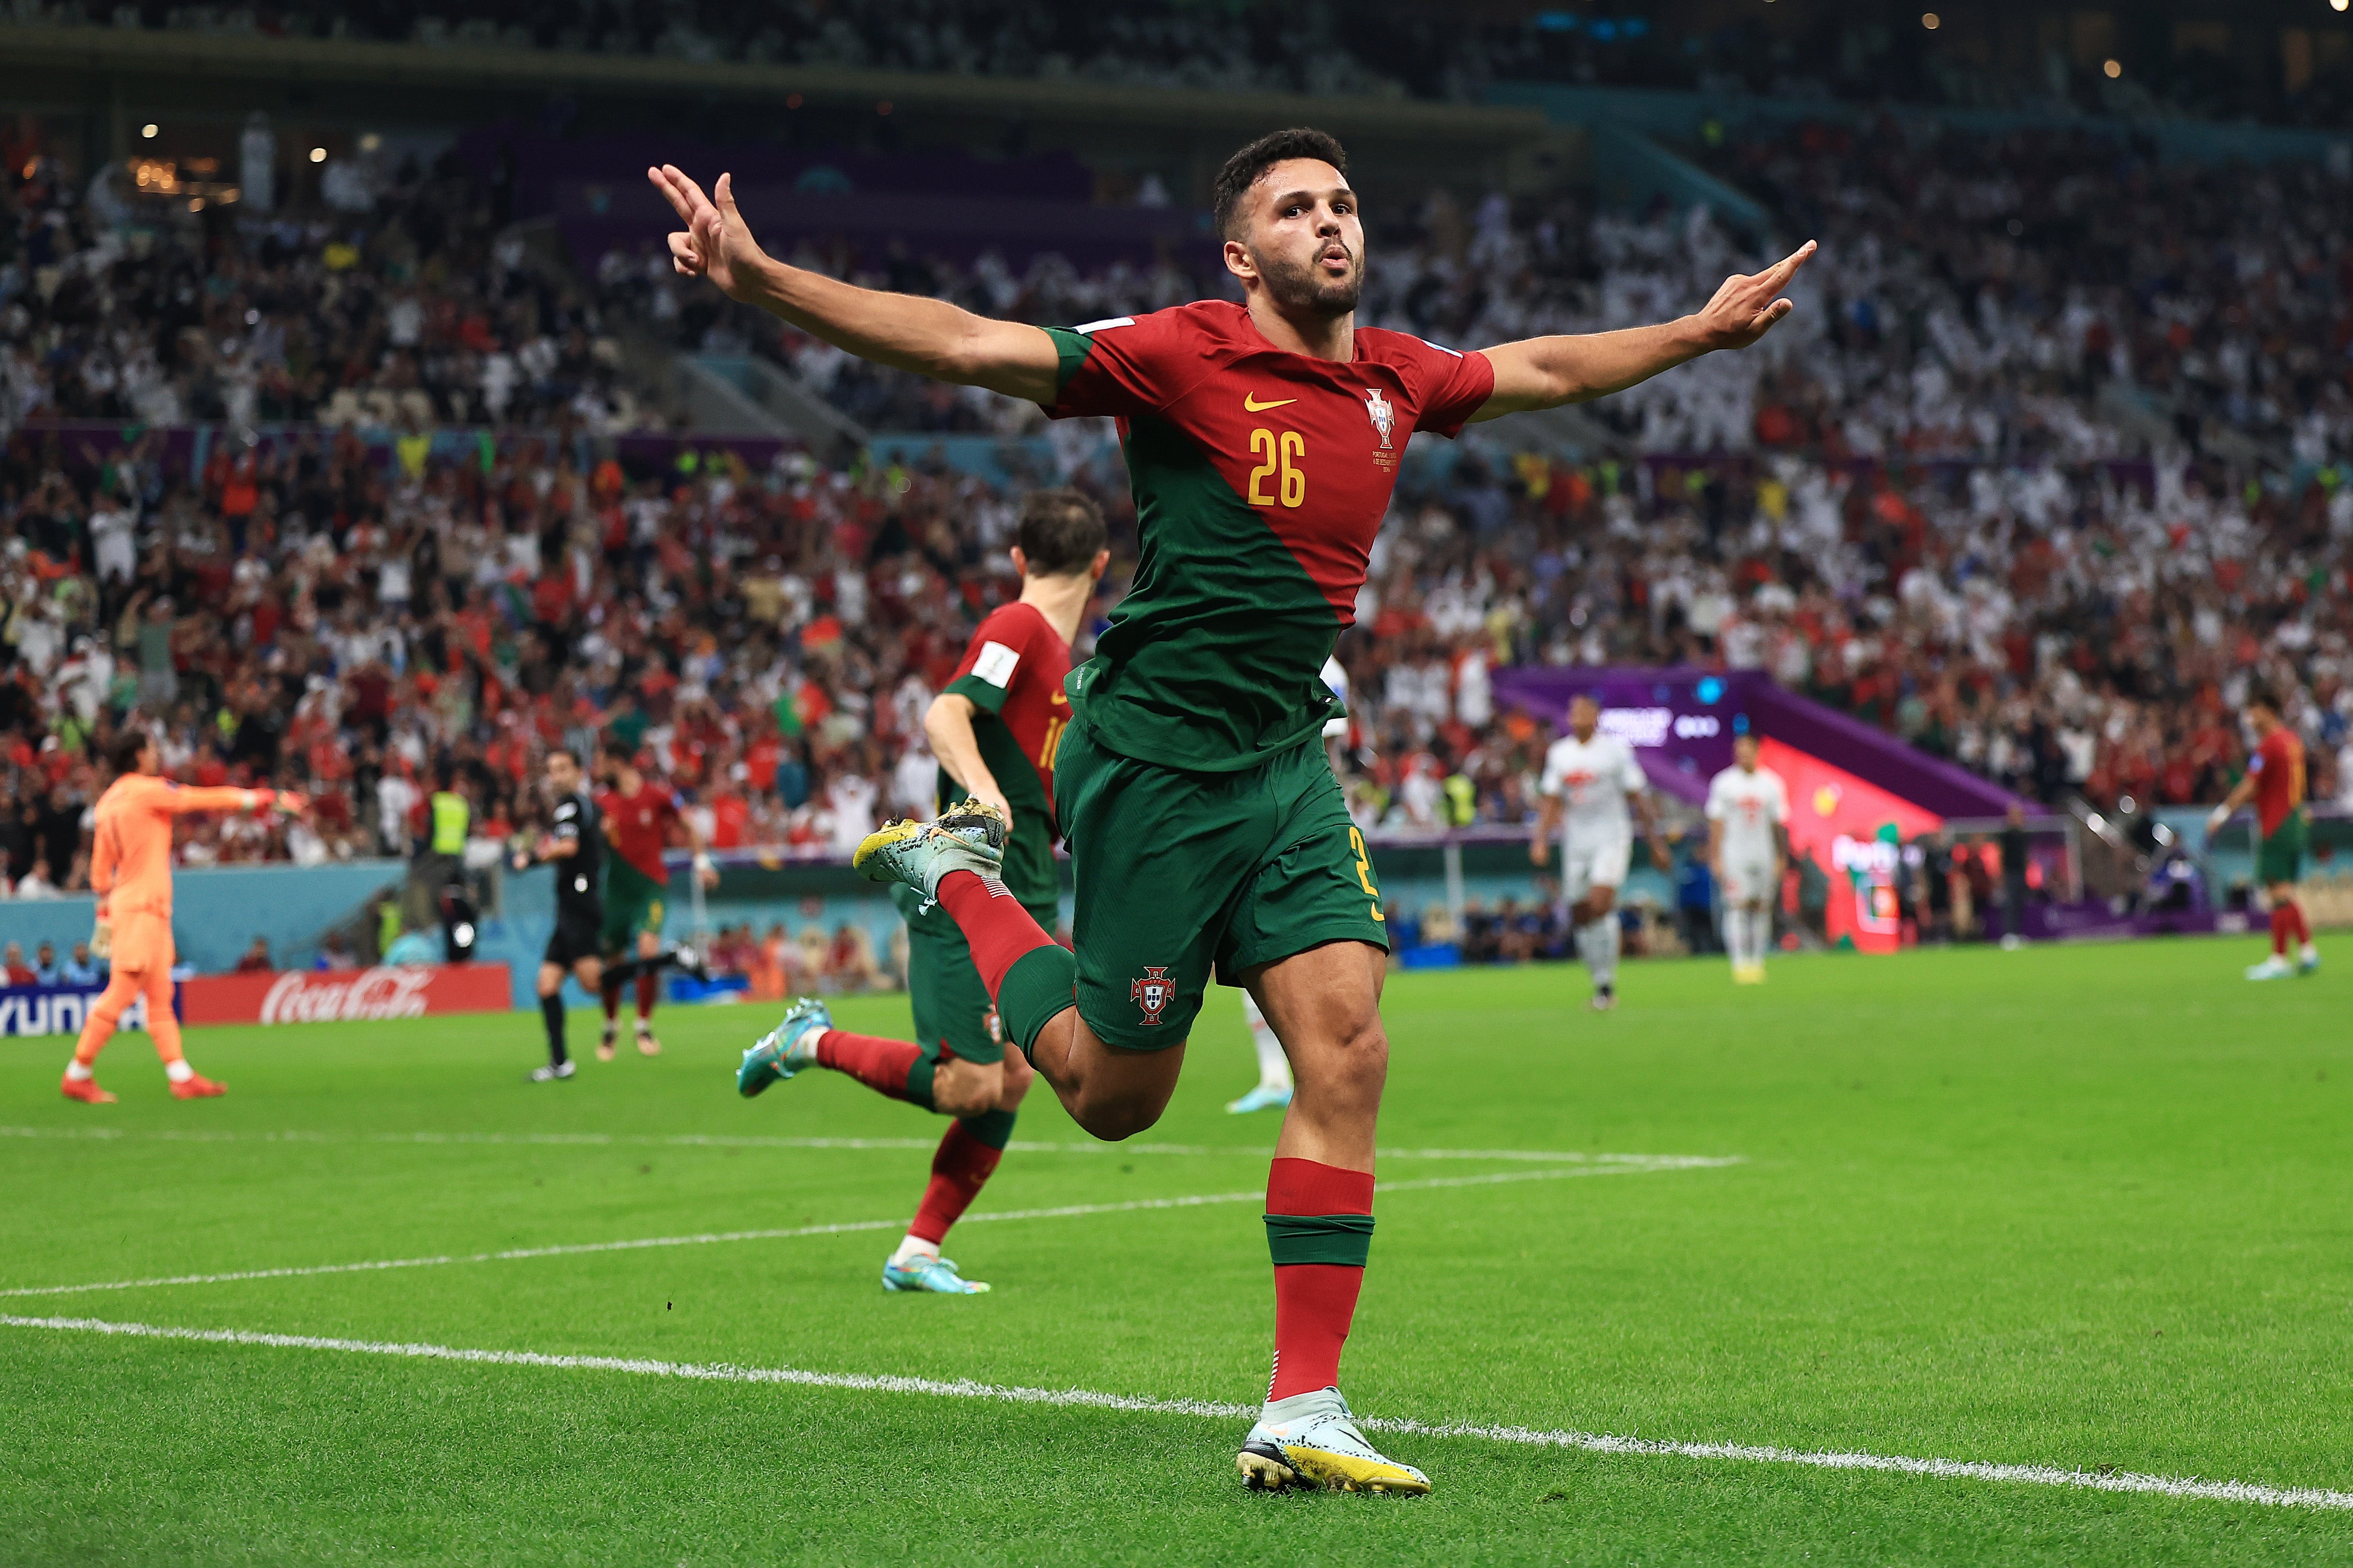 Goncalo Ramos had a dream of an evening as he scored the first hat-trick of the 2022 World Cup